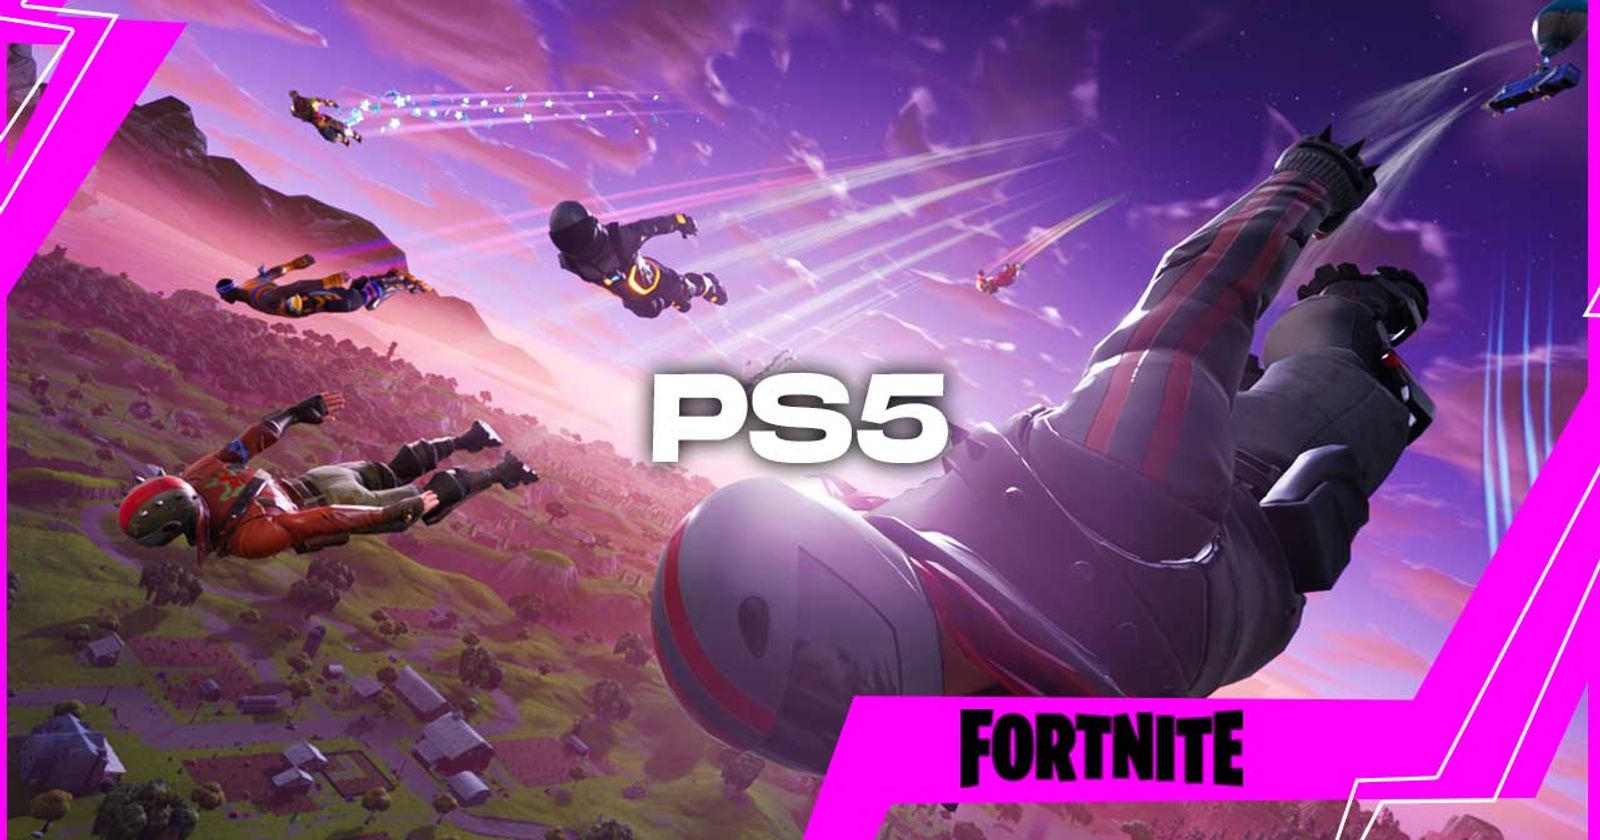 Fortnite's graphics improving on PC, catching up to PS5 & Xbox